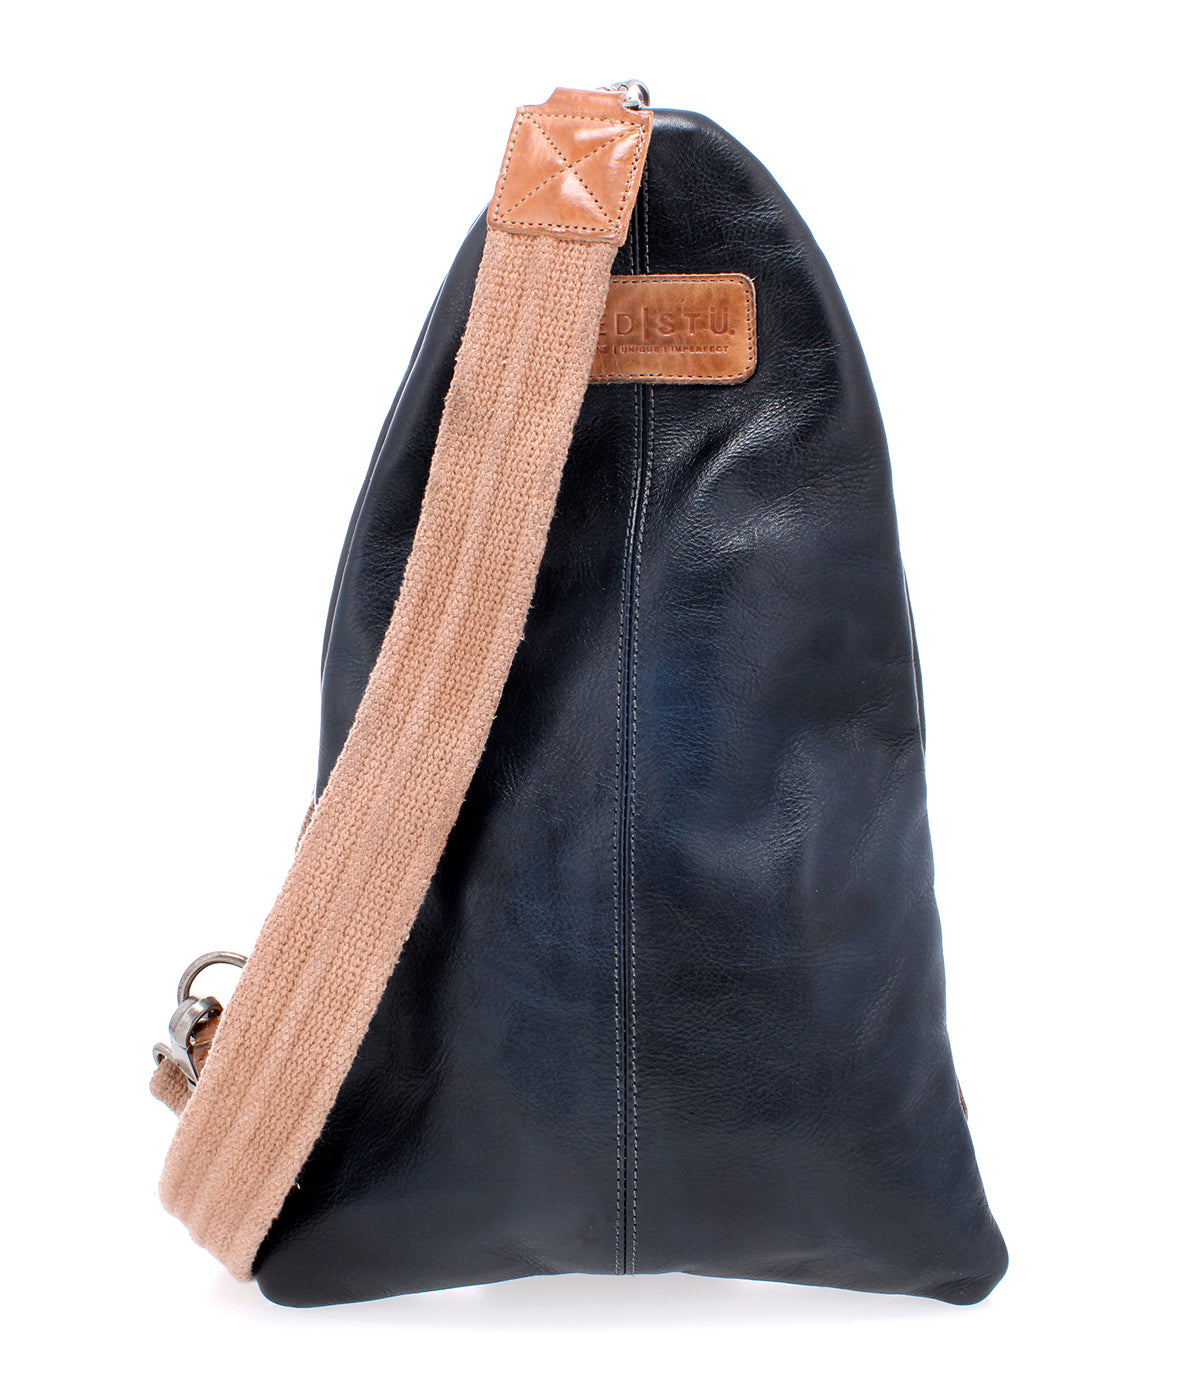 An Andie black leather shoulder bag with a tan strap from Bed Stu.